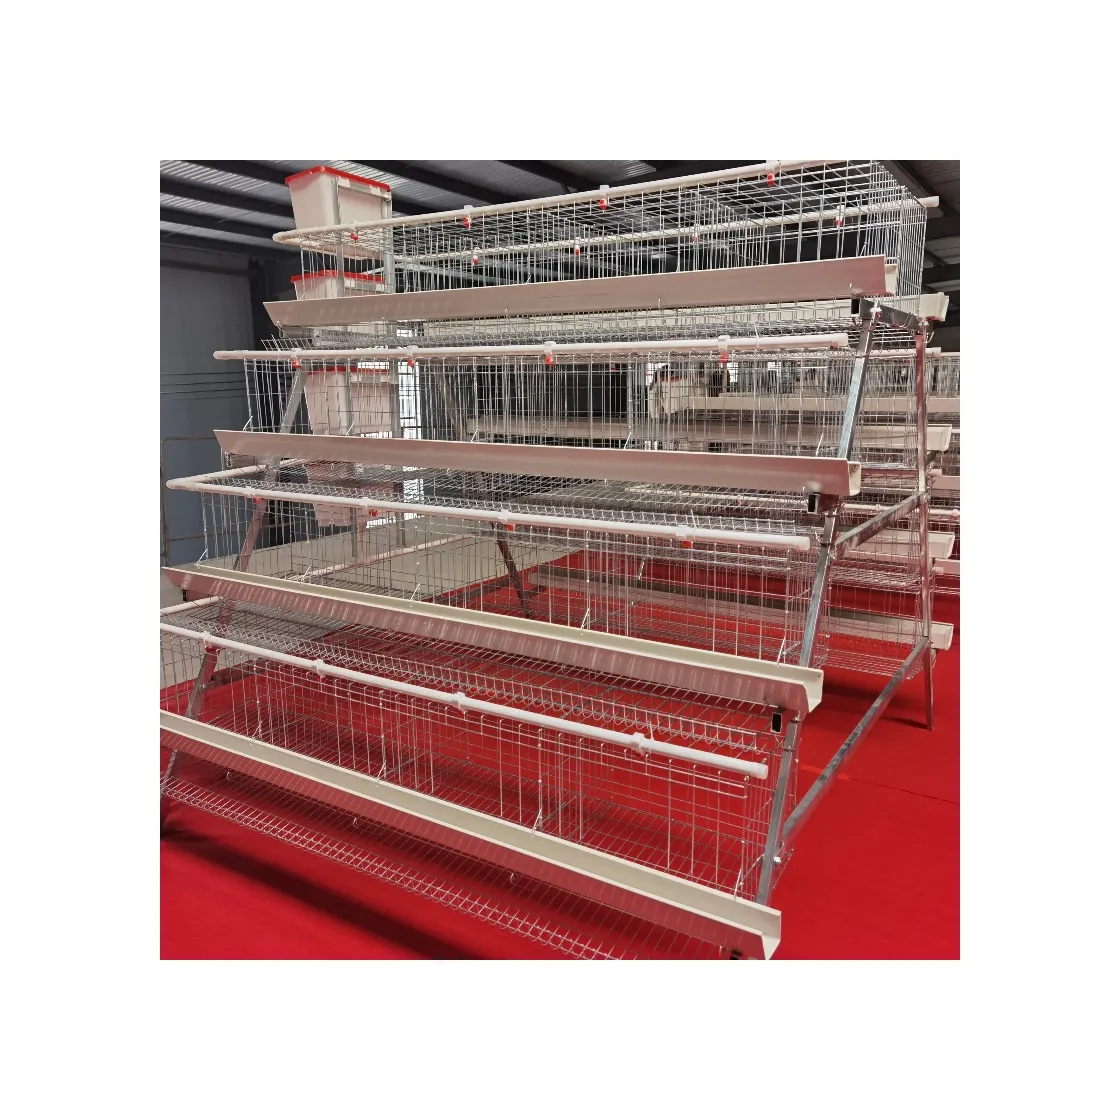 Innovative Automatic Chicken Feeder System For Poultry Farming With Comprehensive Feed Management And Automation